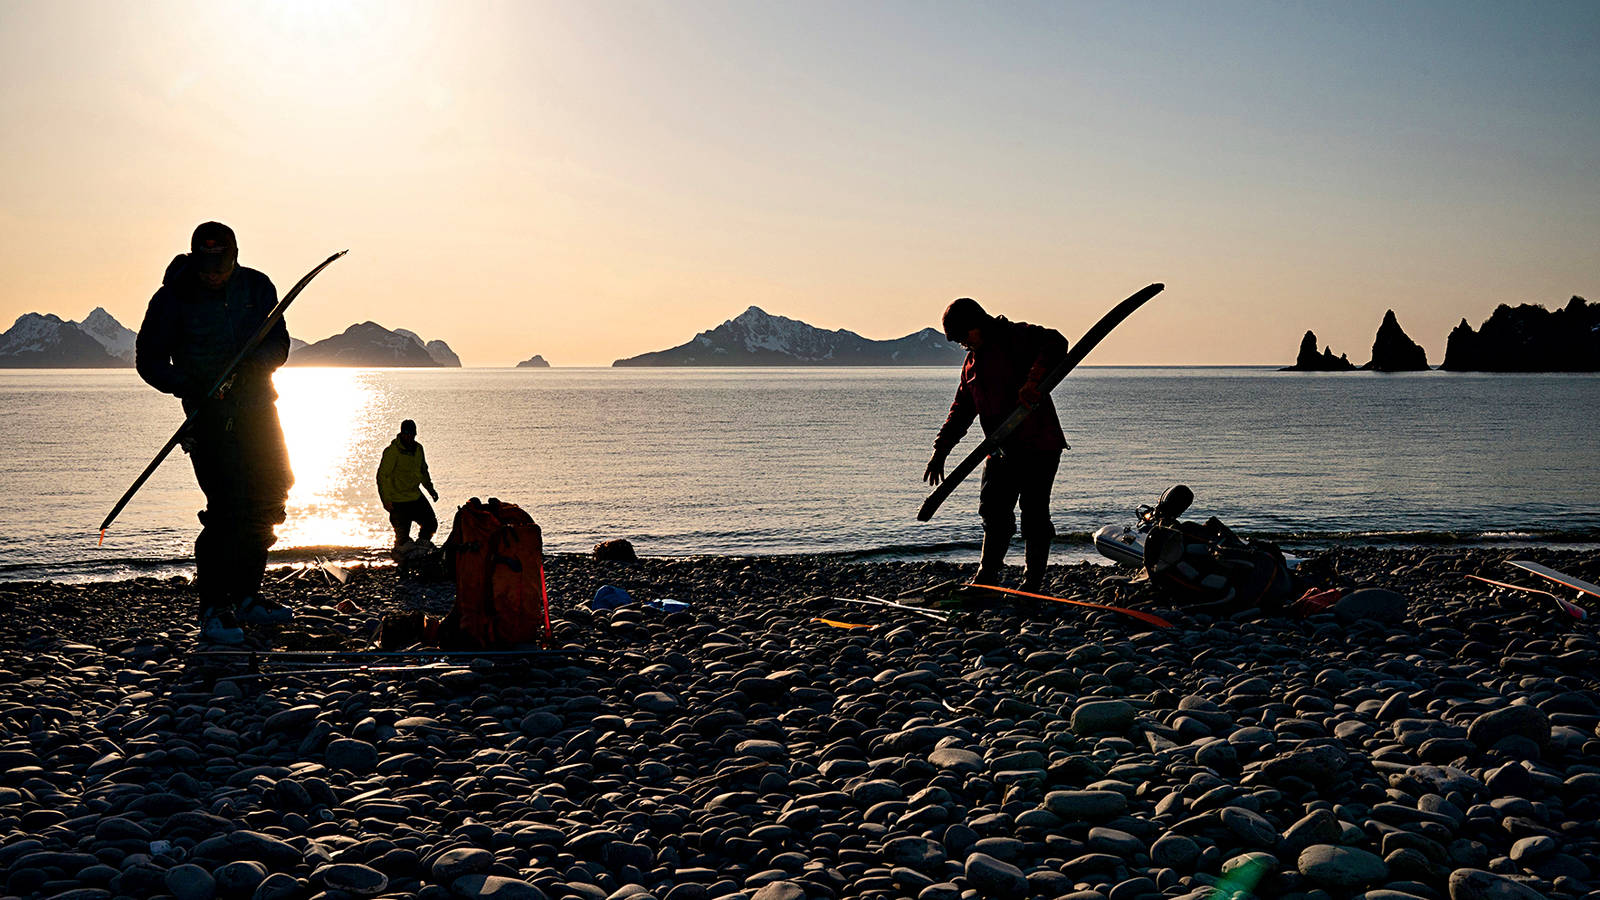 <p>Sunrise finds the team on the shore of Bulldog Cove, preparing for another day of backcountry skiing.</p>